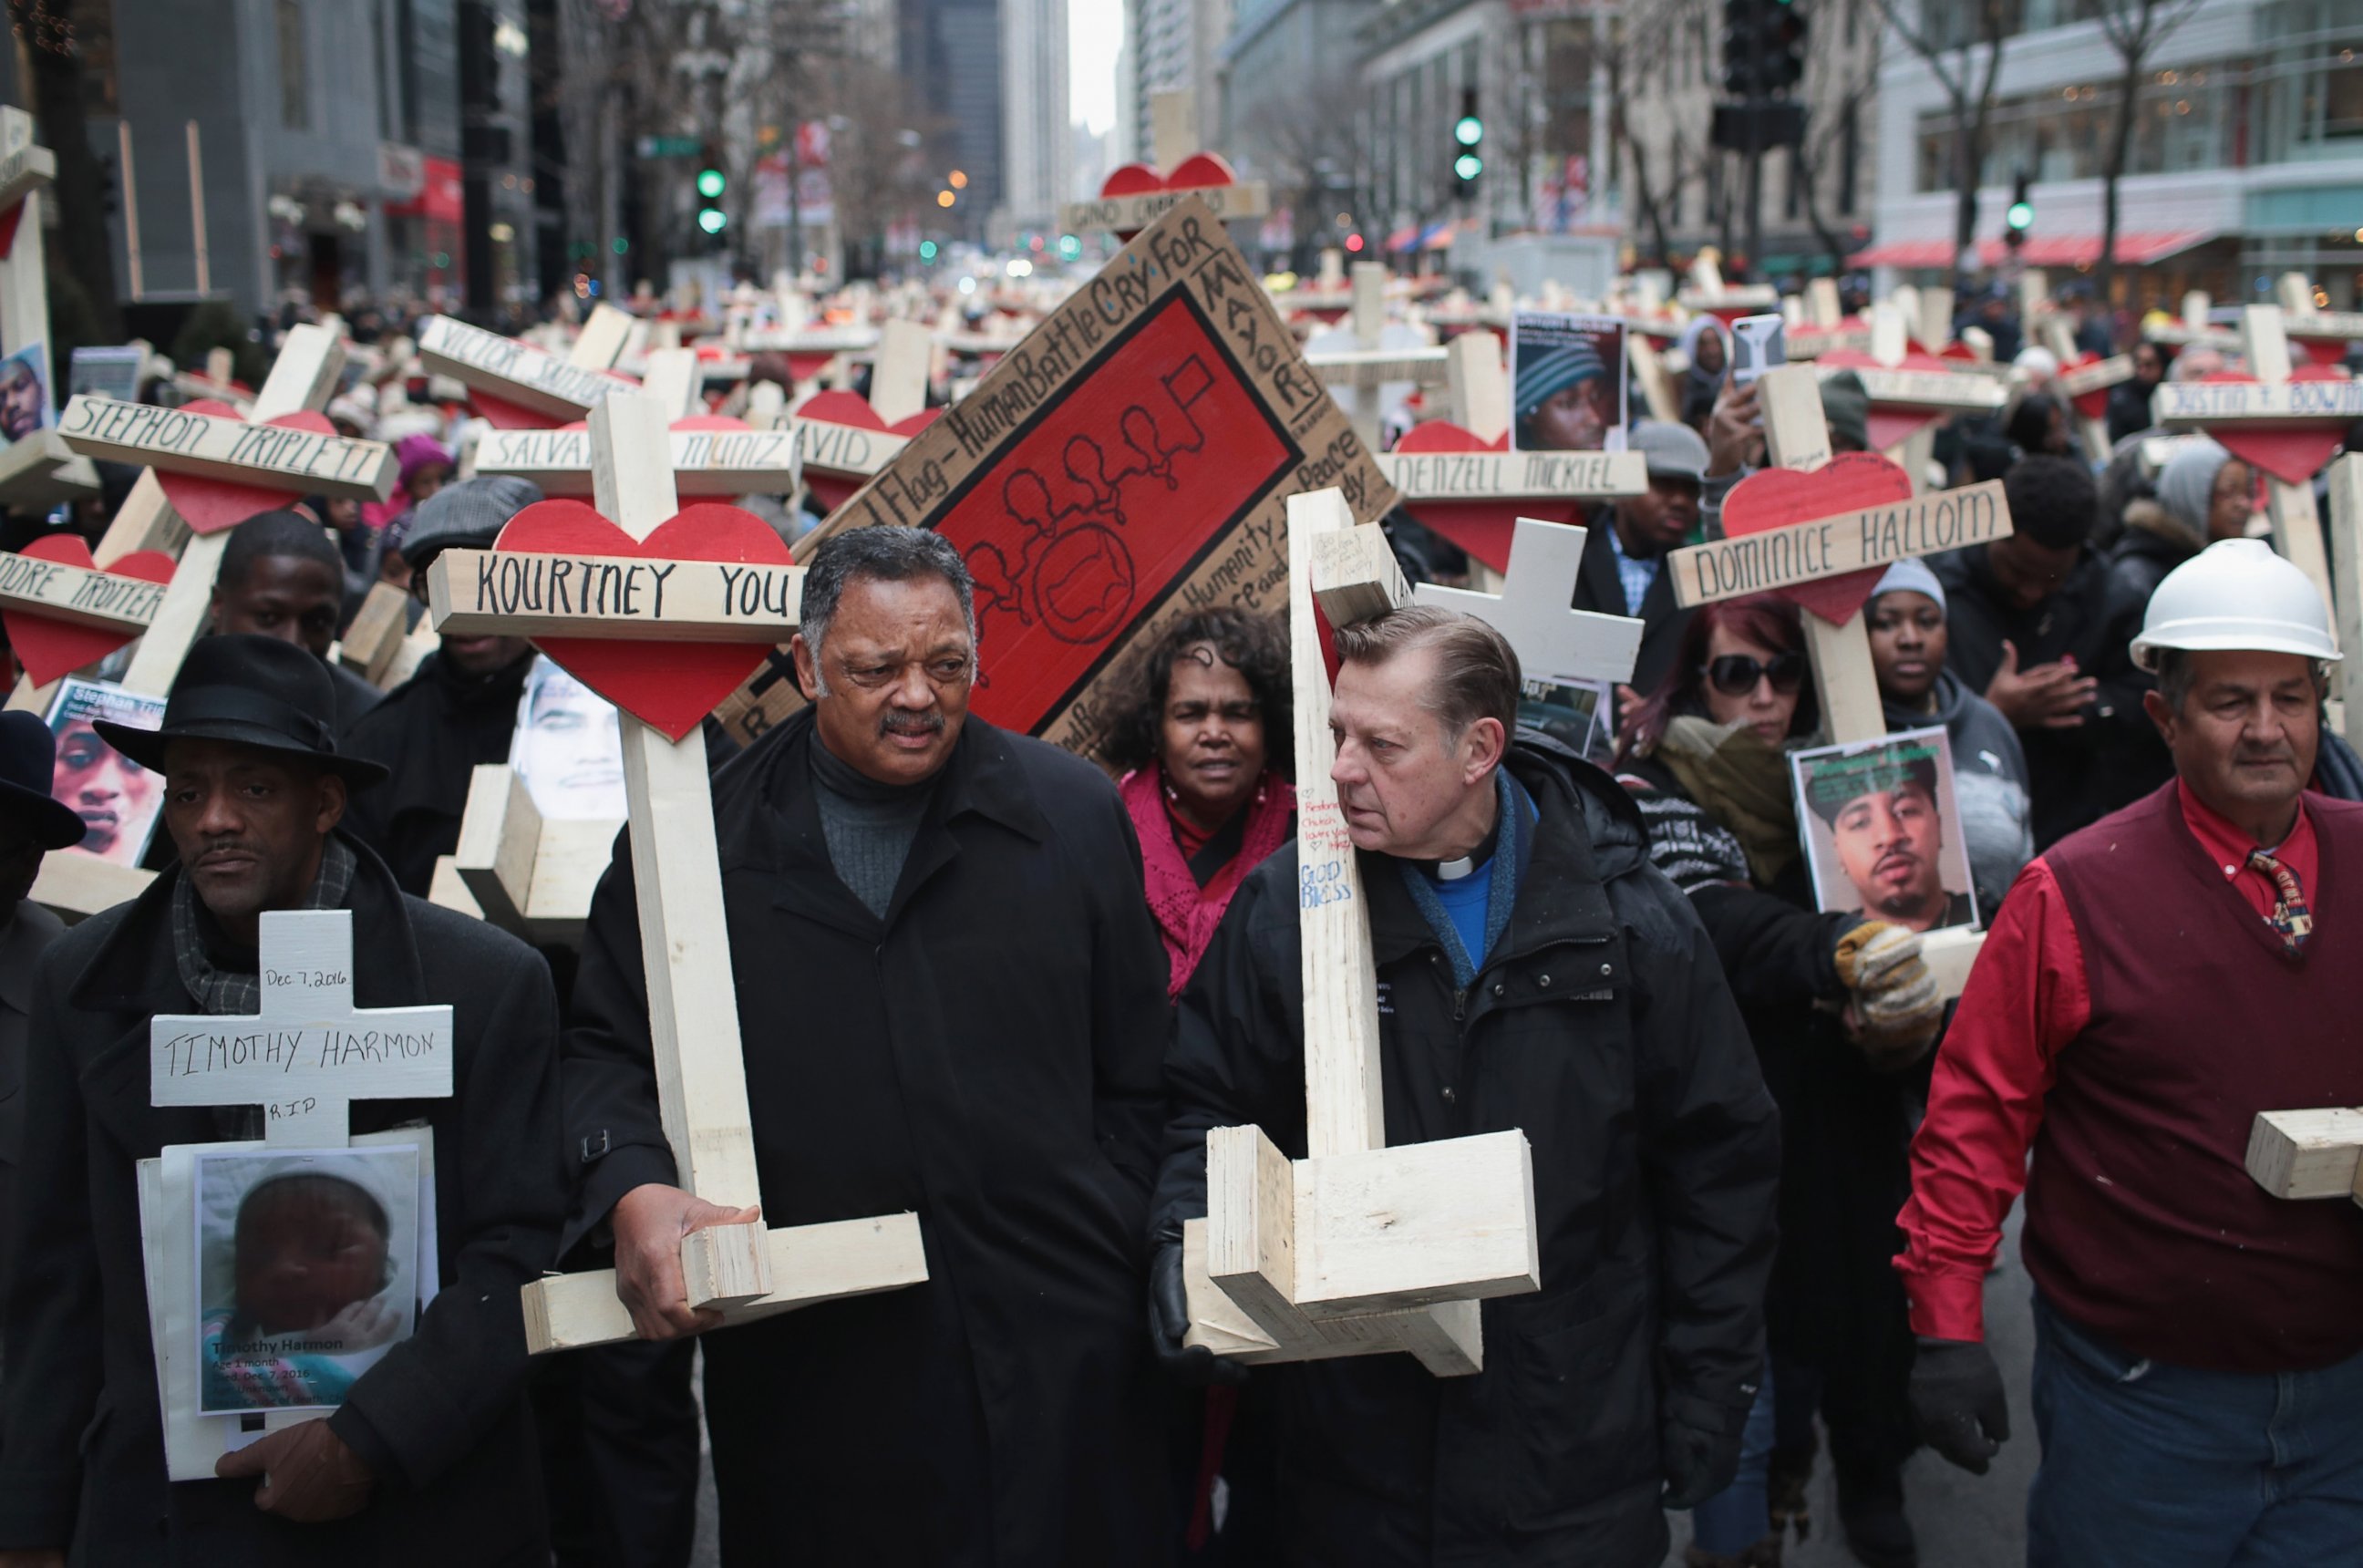 PHOTO: The Rev. Jesse Jackson (L) and Rev. Michael Pfleger carry crosses as they march with other residents, activists, and family members of victims of gun violence down Michigan Avenue, Dec. 31, 2016 in Chicago.